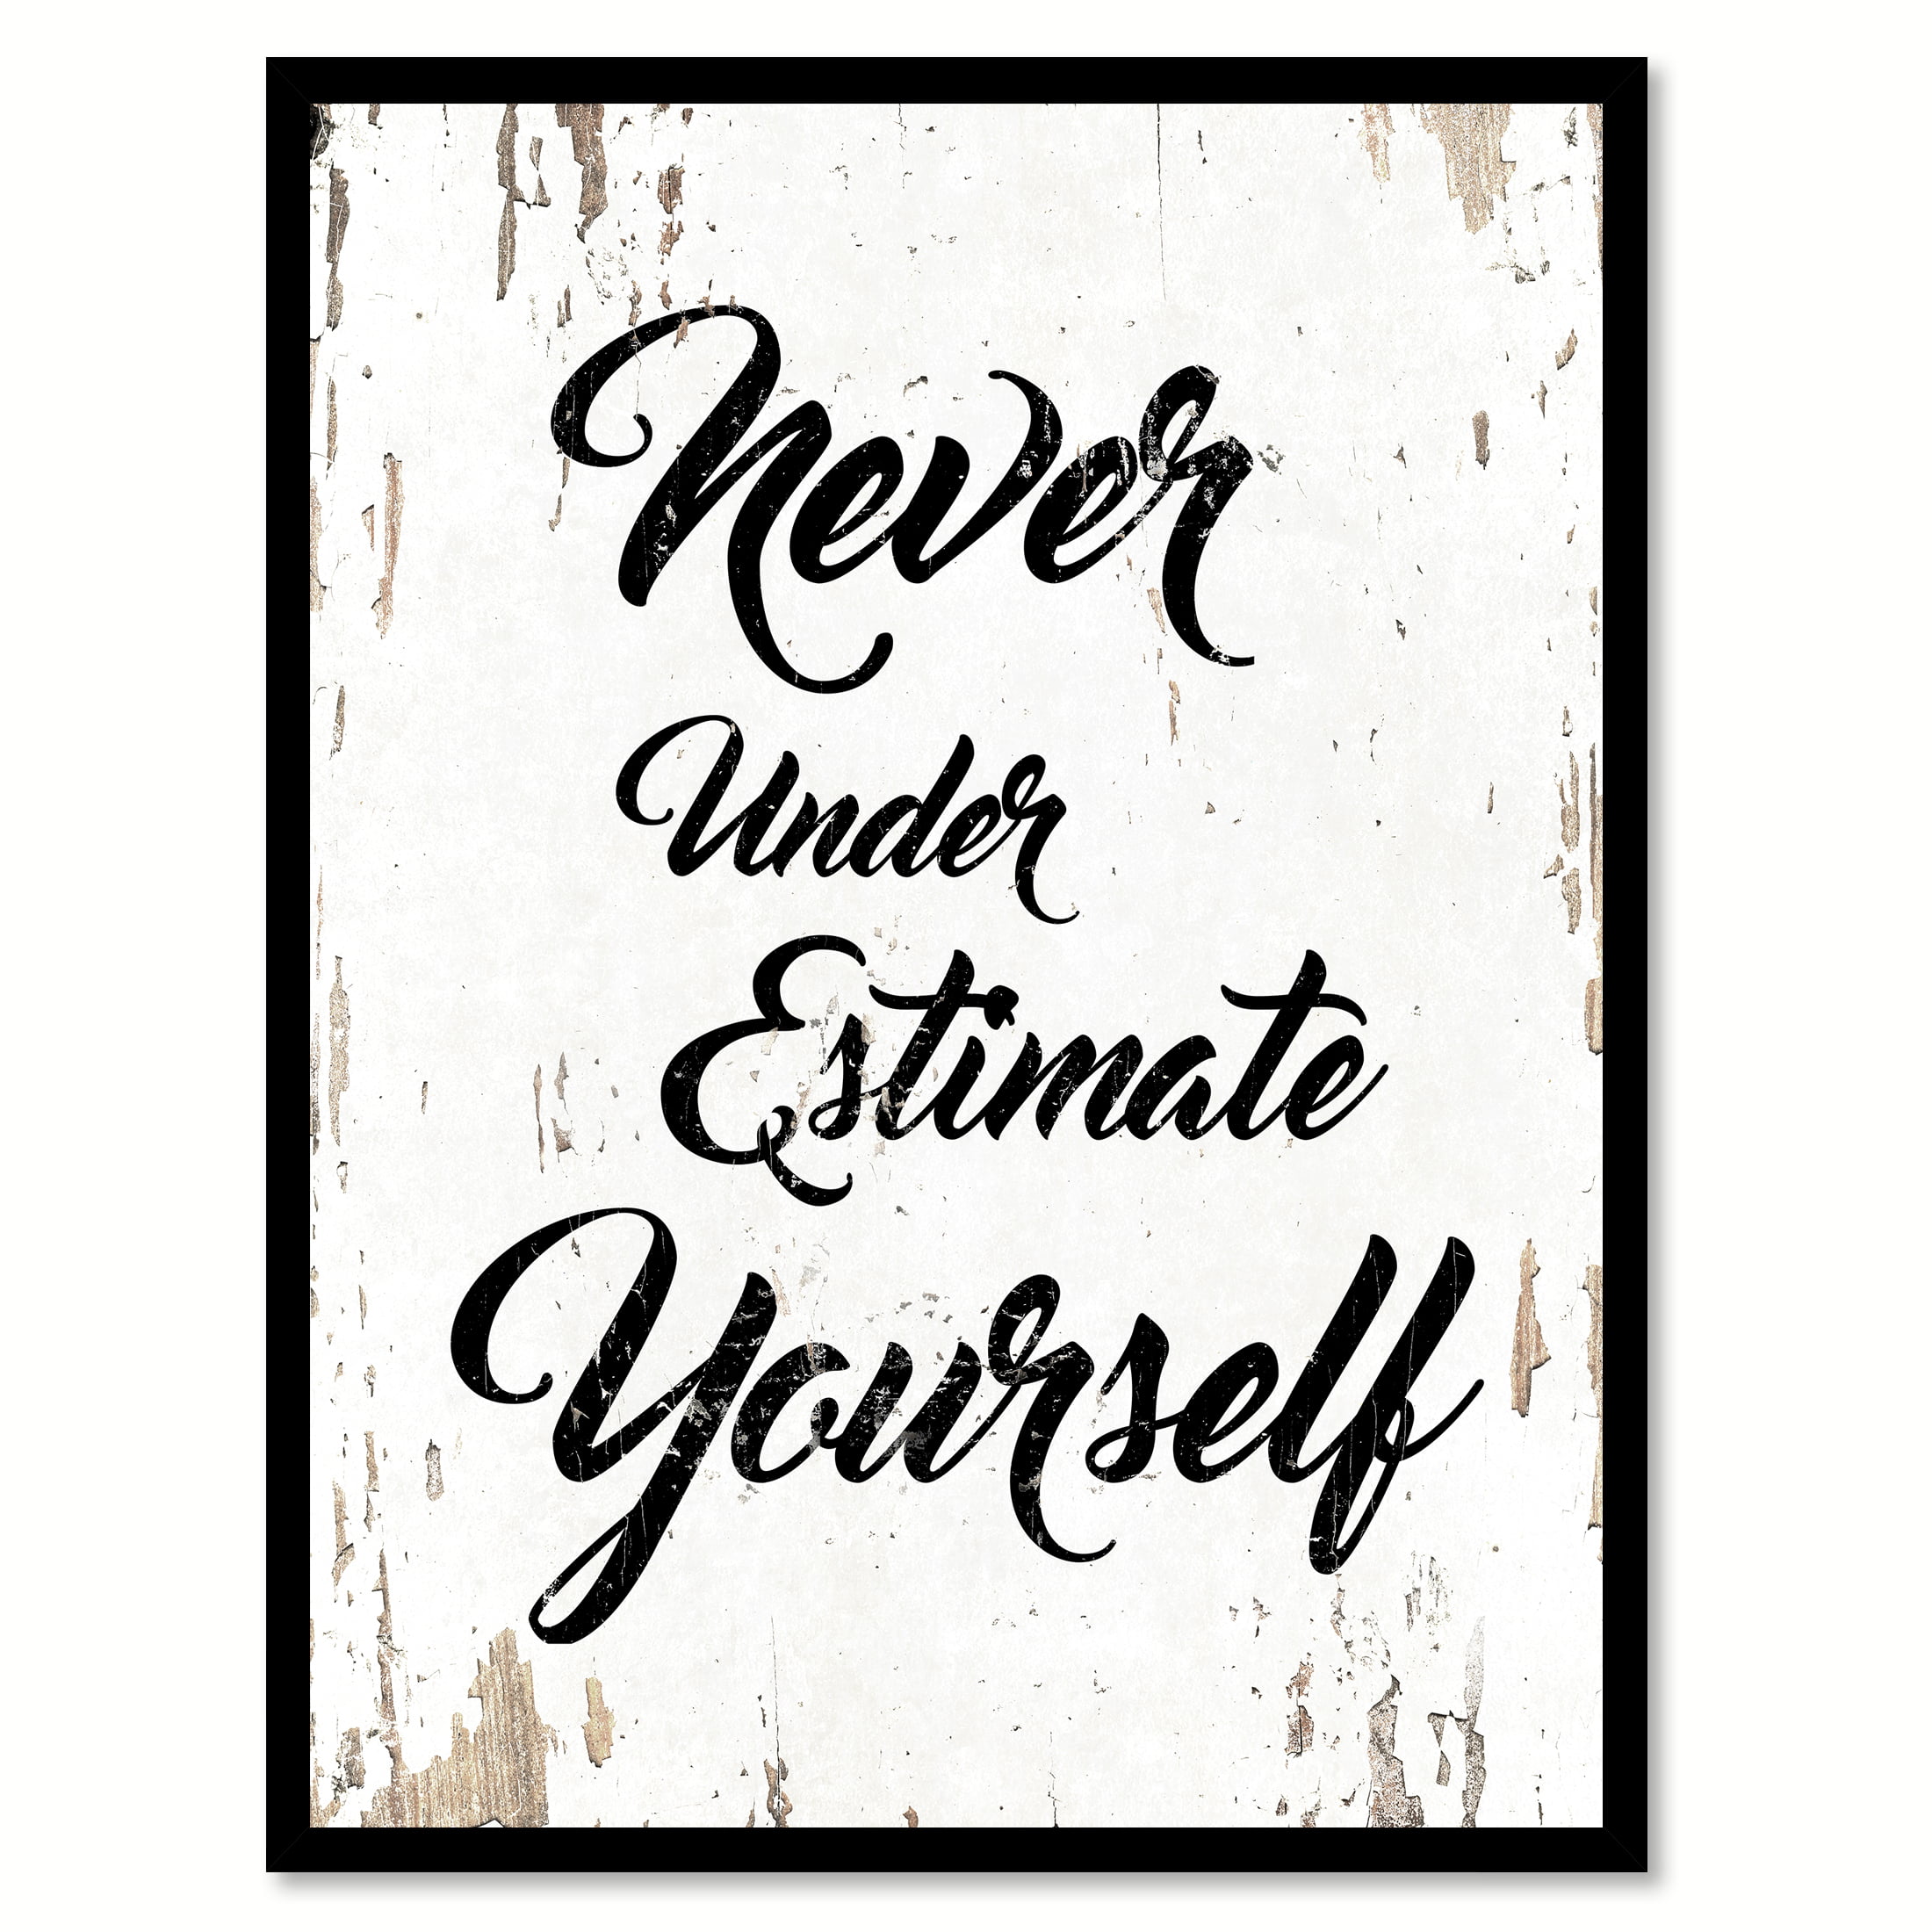 Never underestimate yourself Quote Saying White Canvas Print with ...